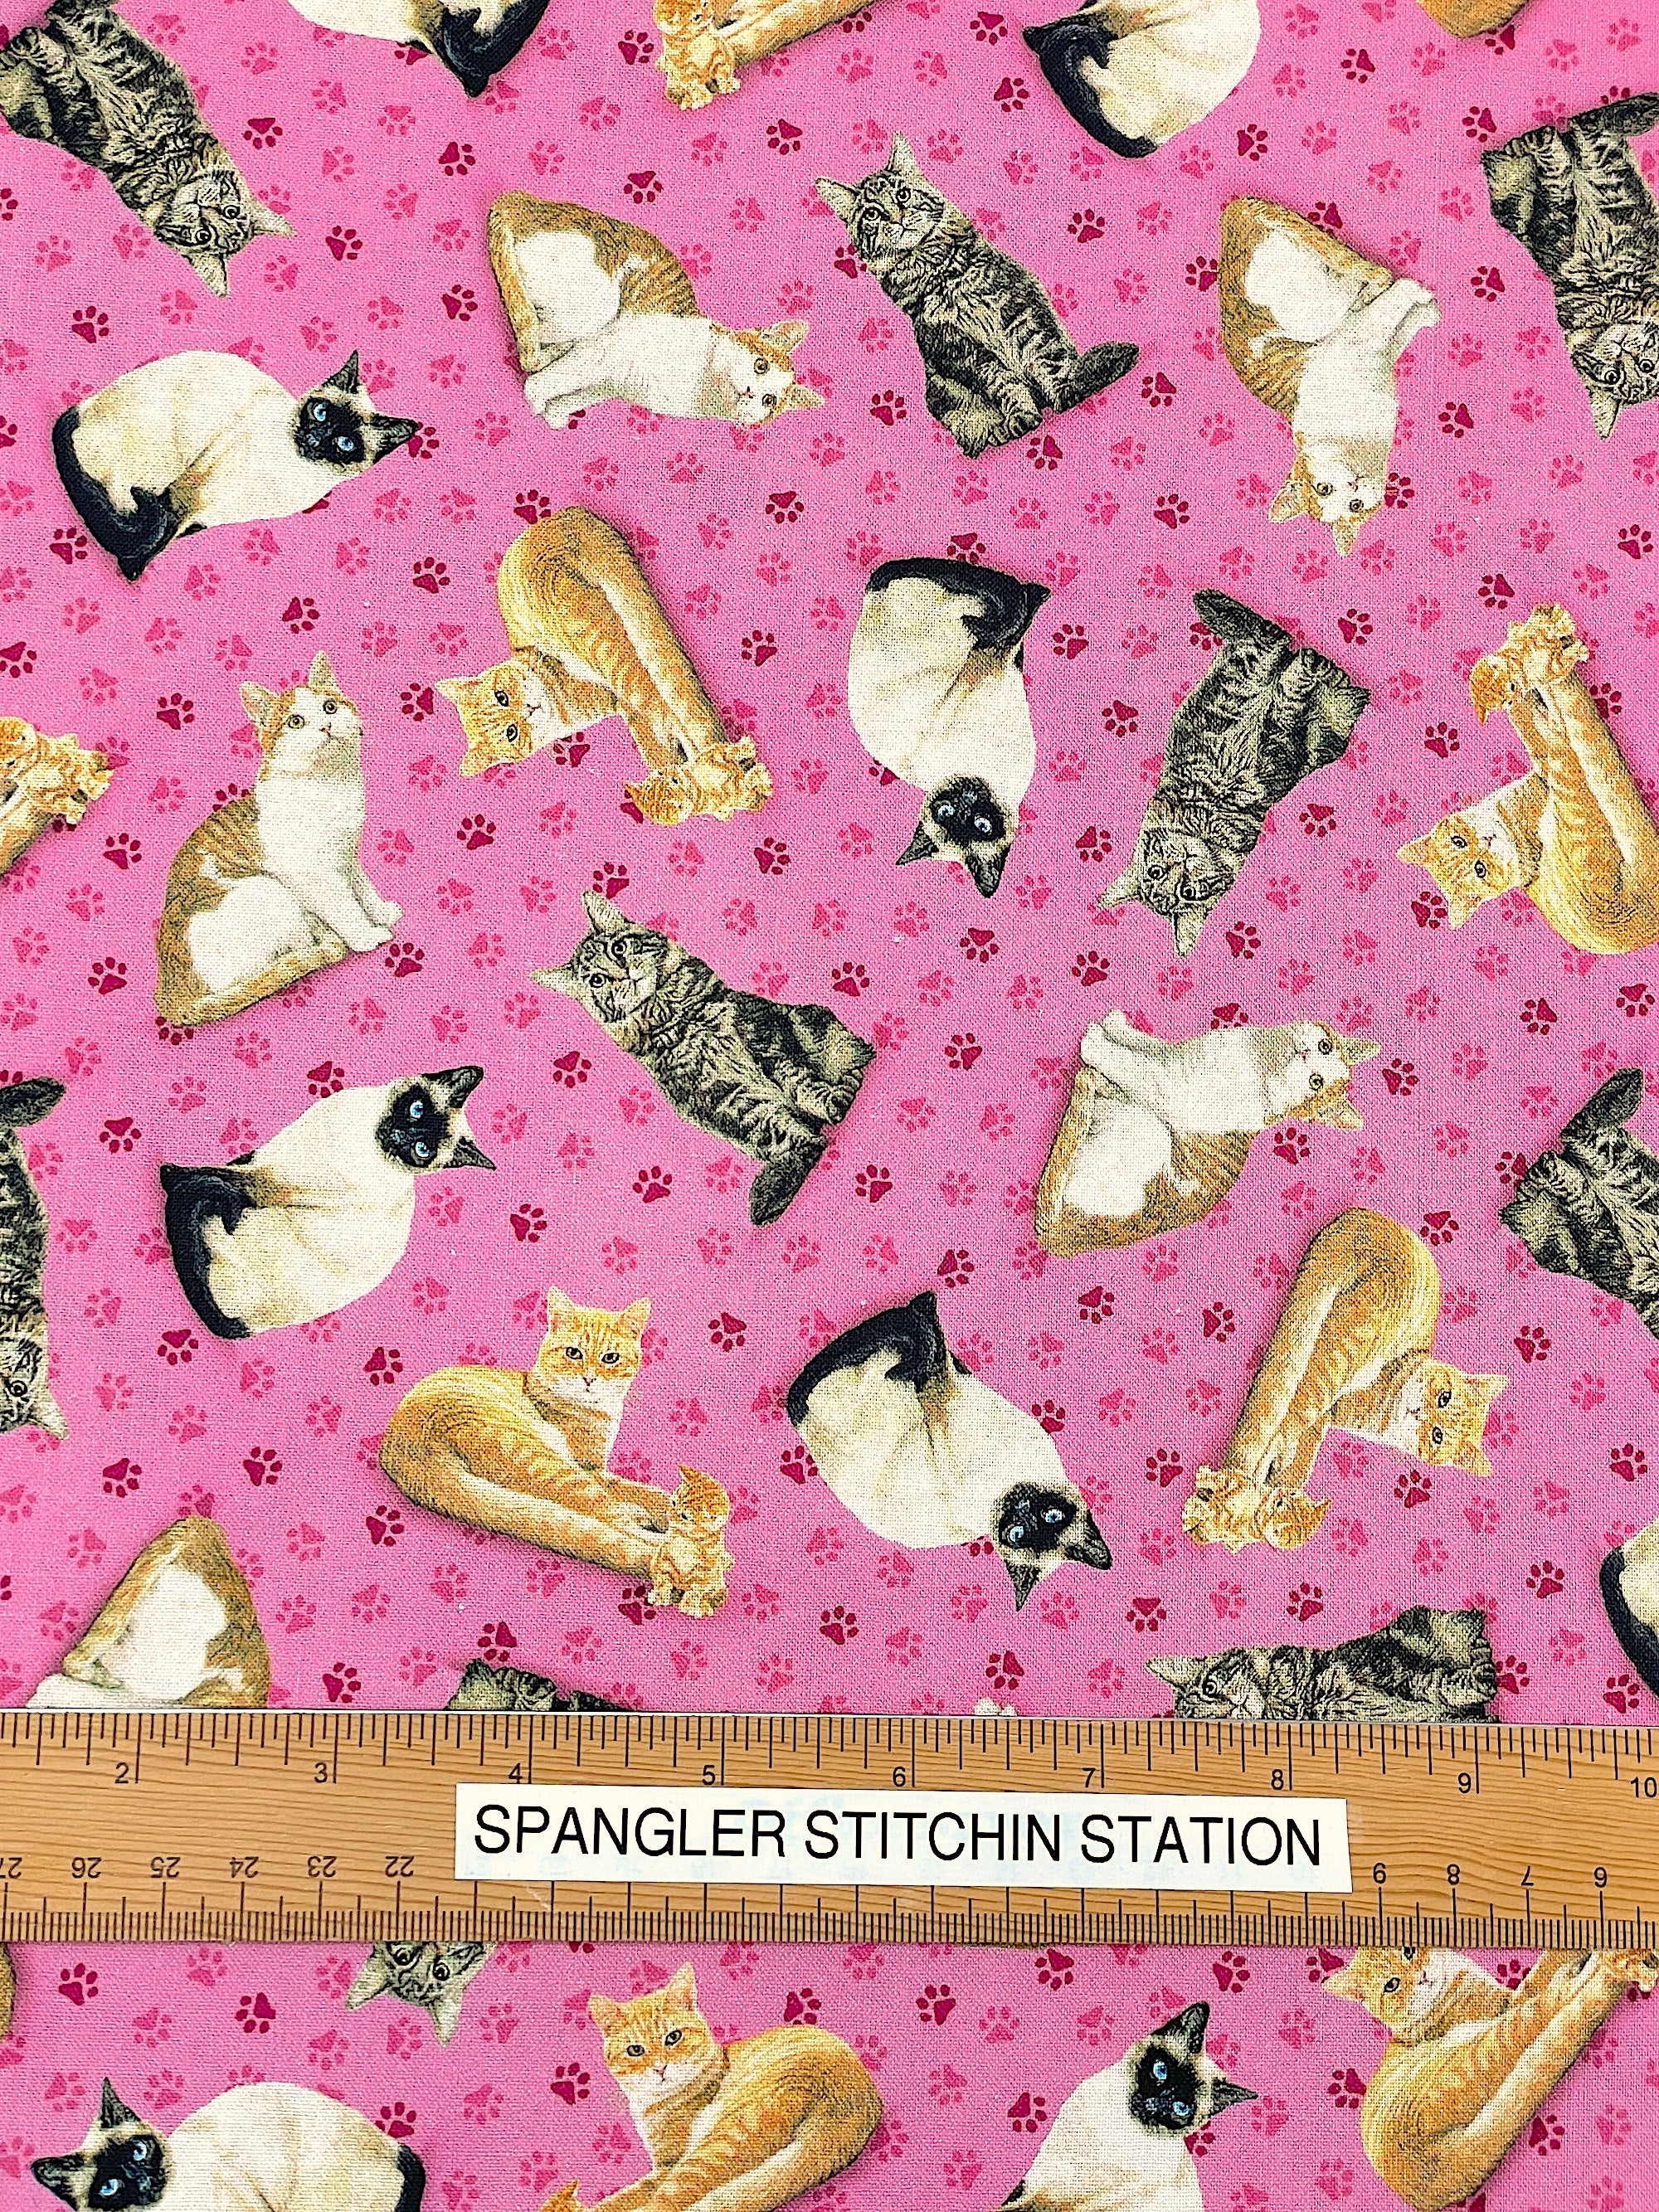 Ruler showing size of cats on fabric.